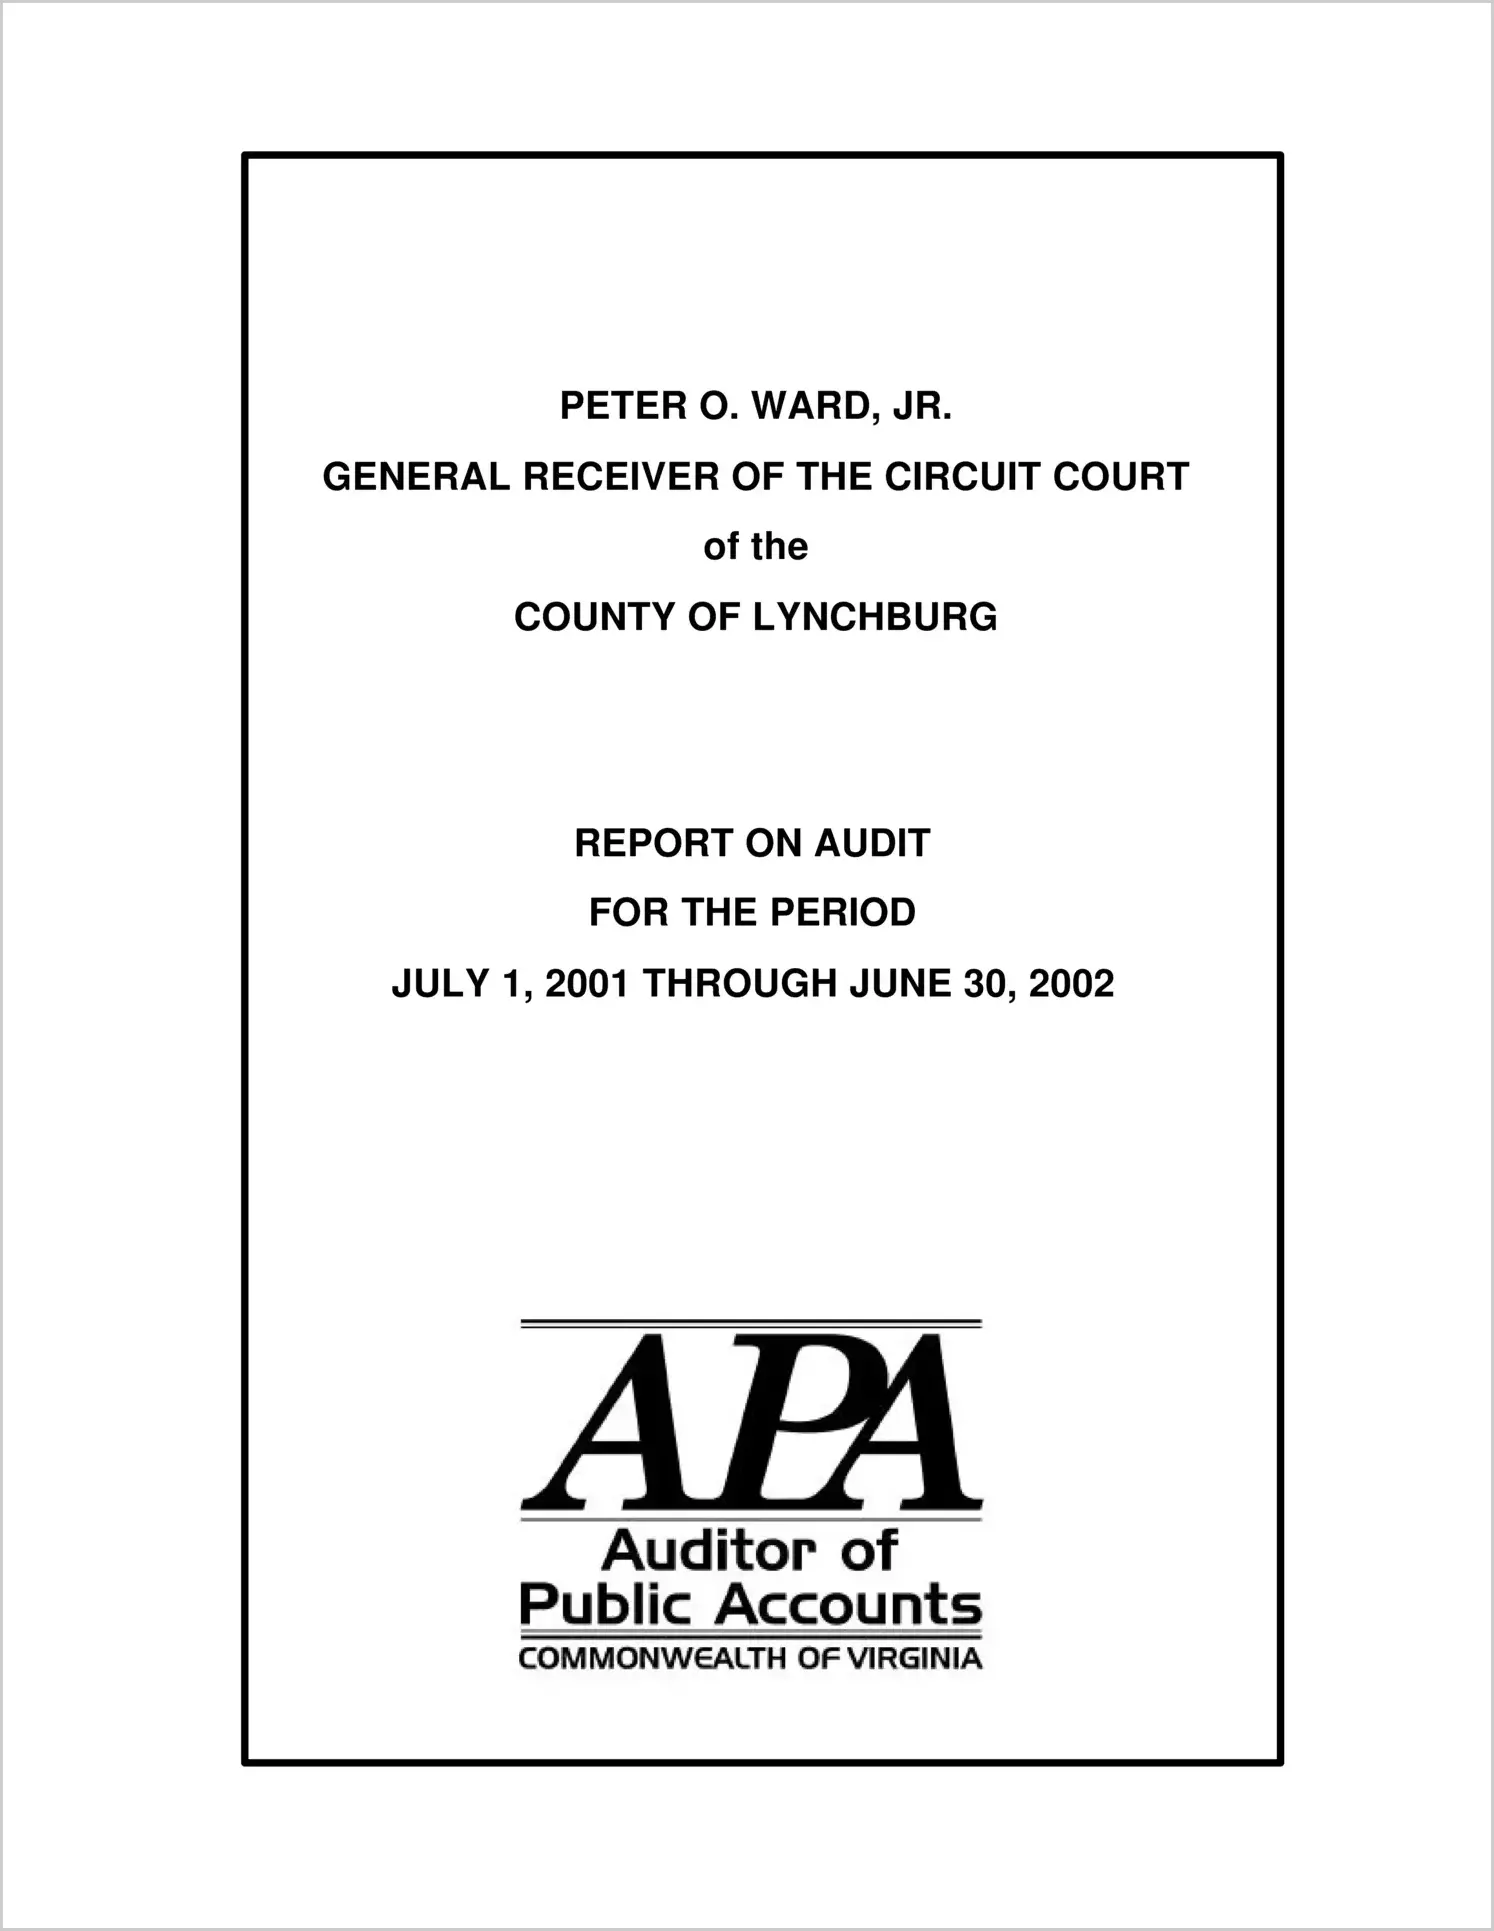 General Receiver of the Circuit Court for the City of Lynchburg for the period July 1, 2001 through June 30, 2002